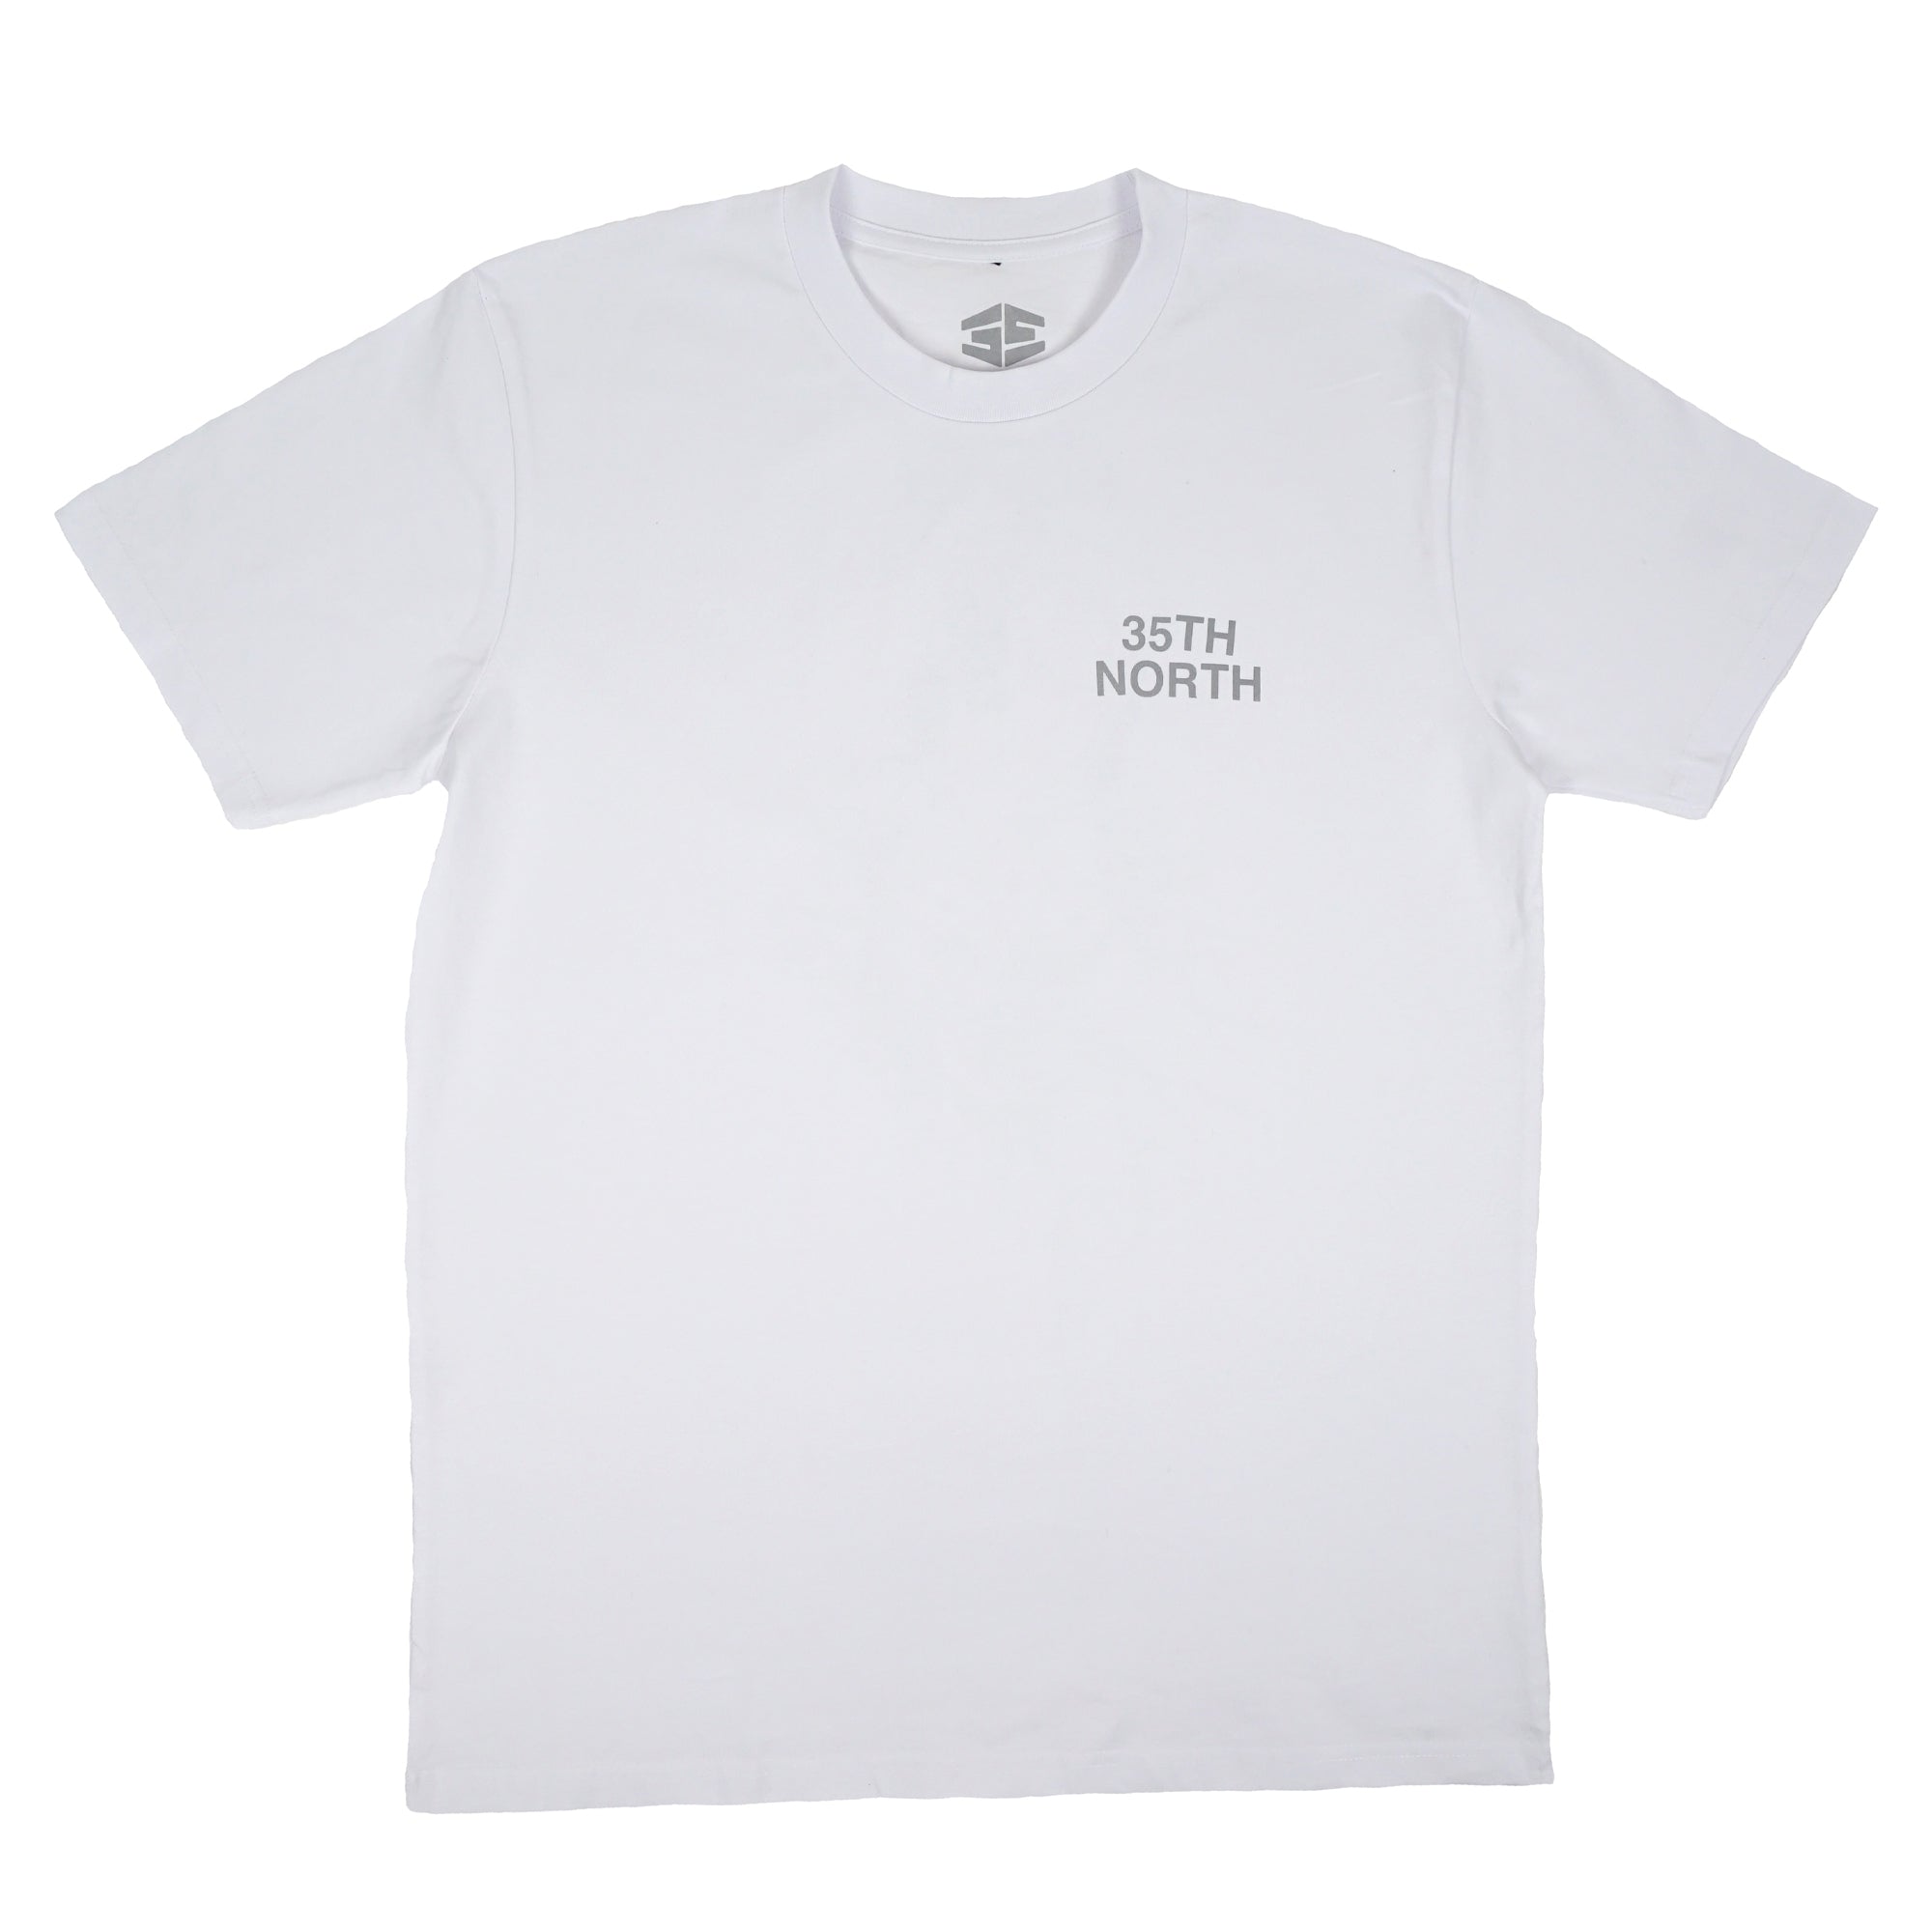 35th North 'Roll The Dice' T-Shirt - White